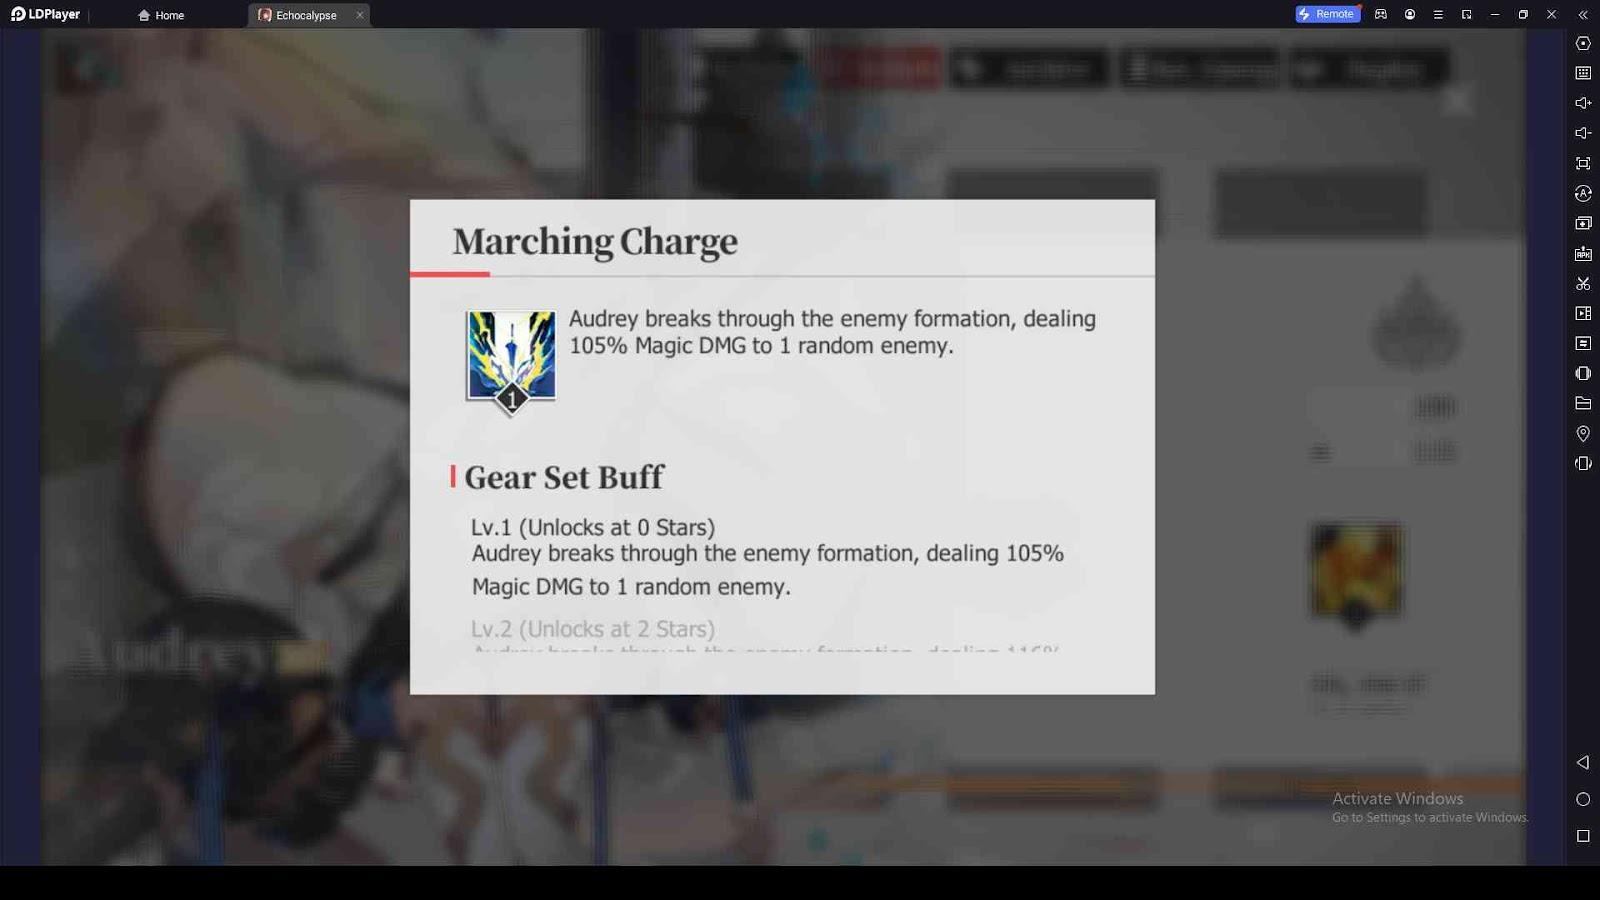 Marching Charge